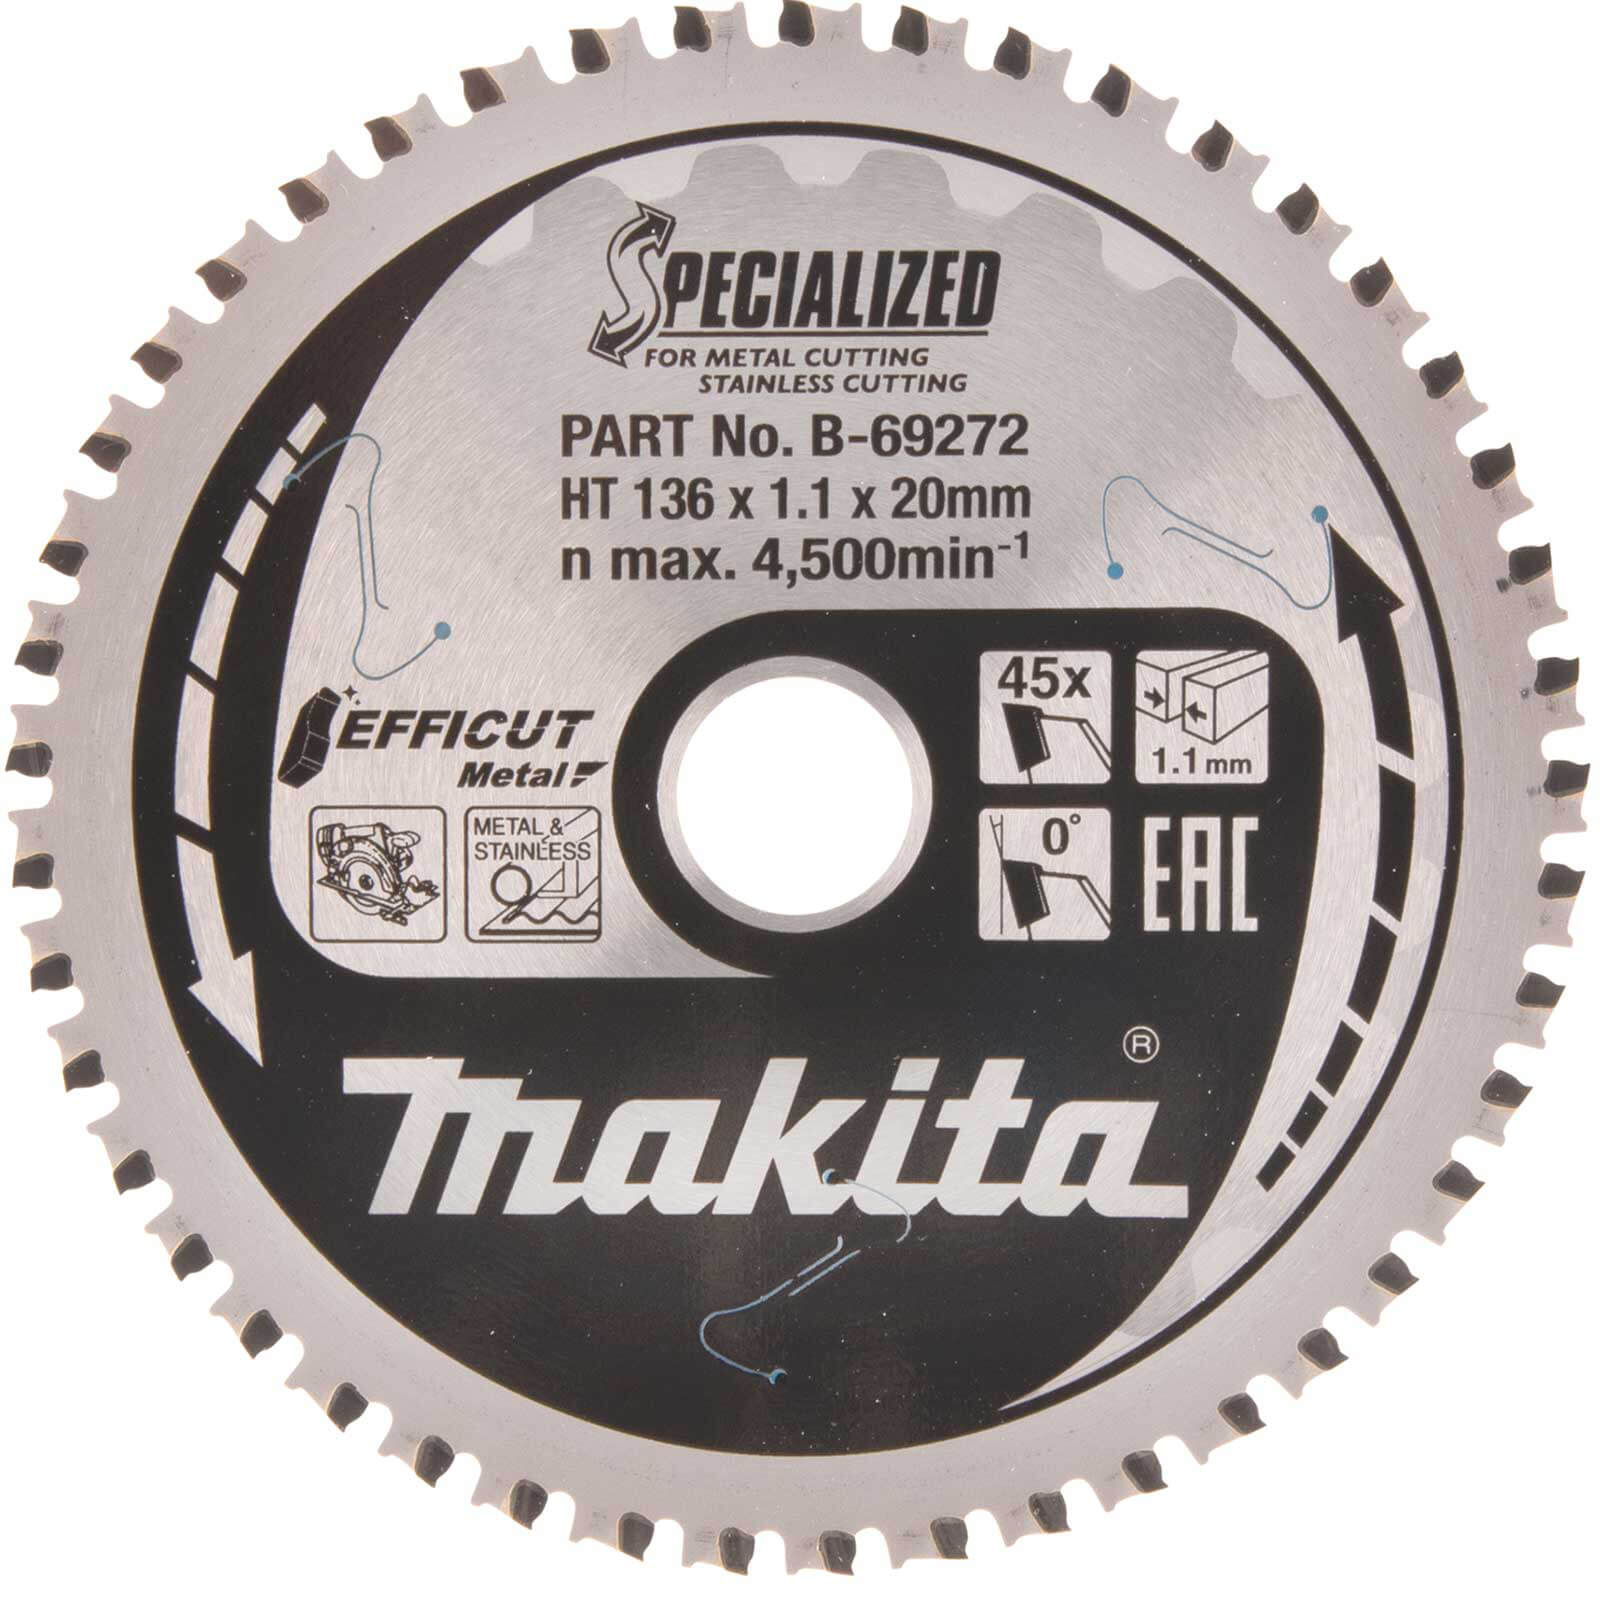 Photo of Makita Specialized Efficut Stainless Circular Saw Blade 150mm 48t 20mm